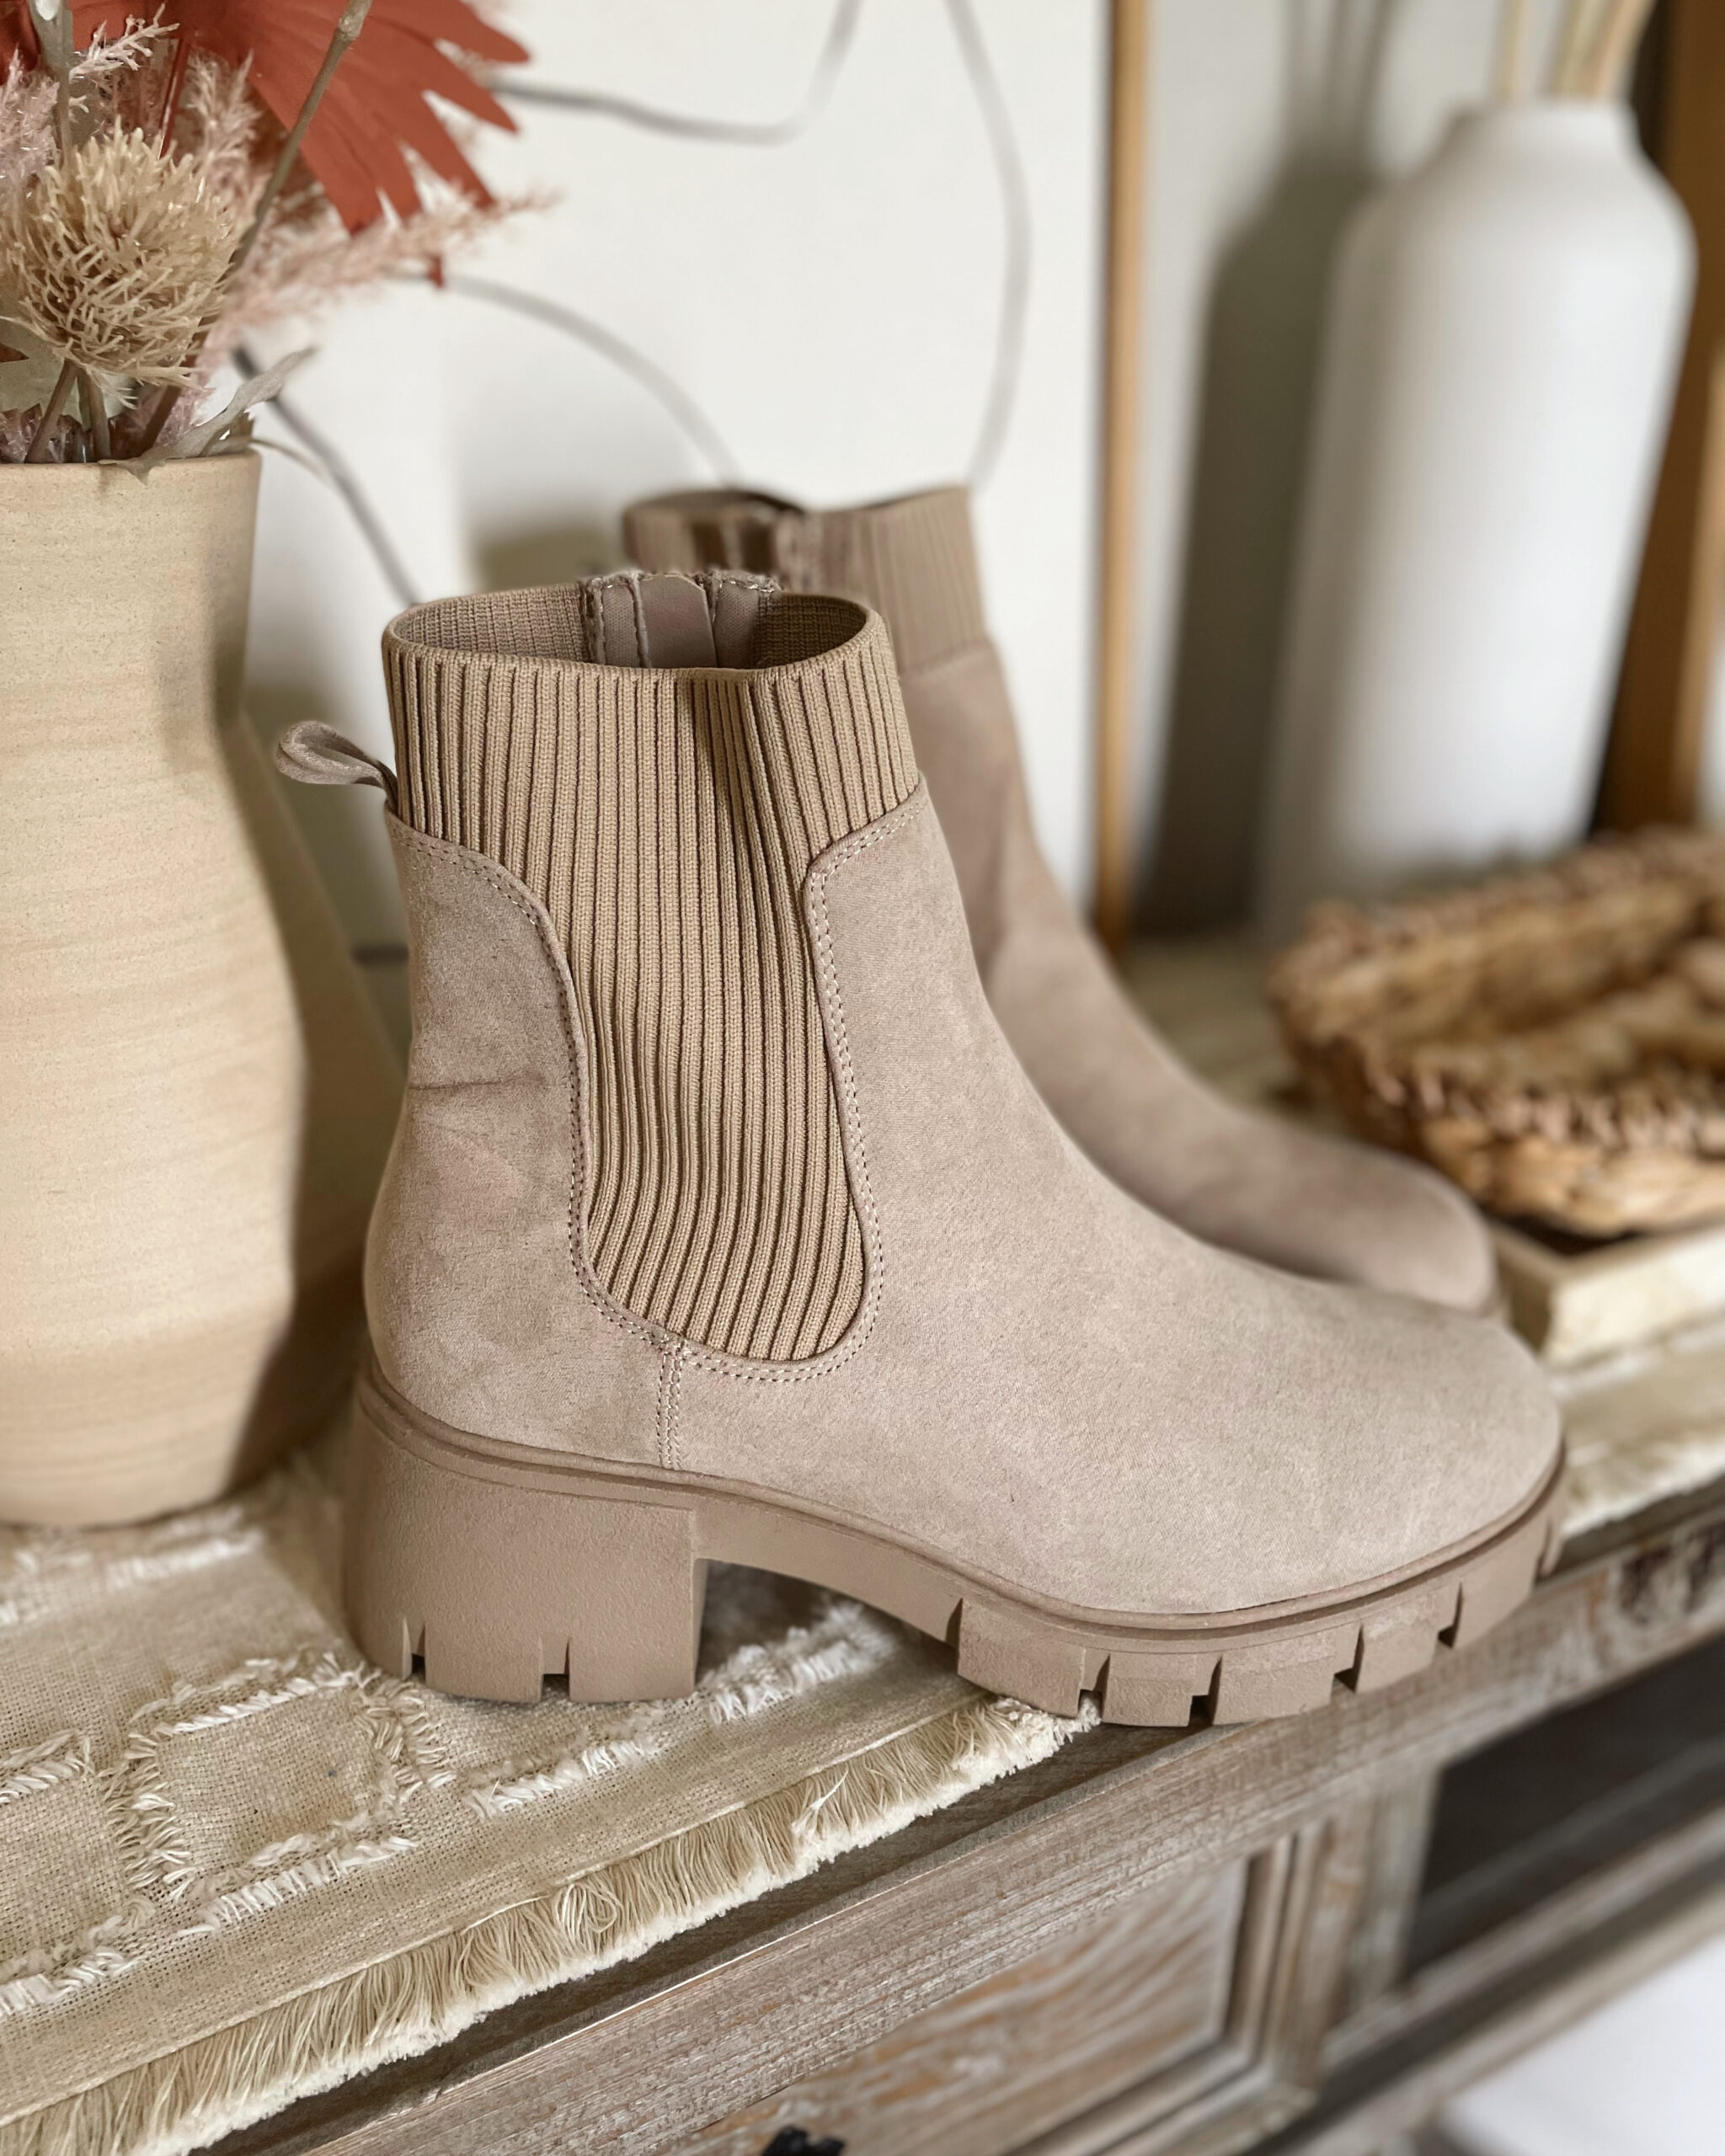 Walmart Chelsea Boots for Fall